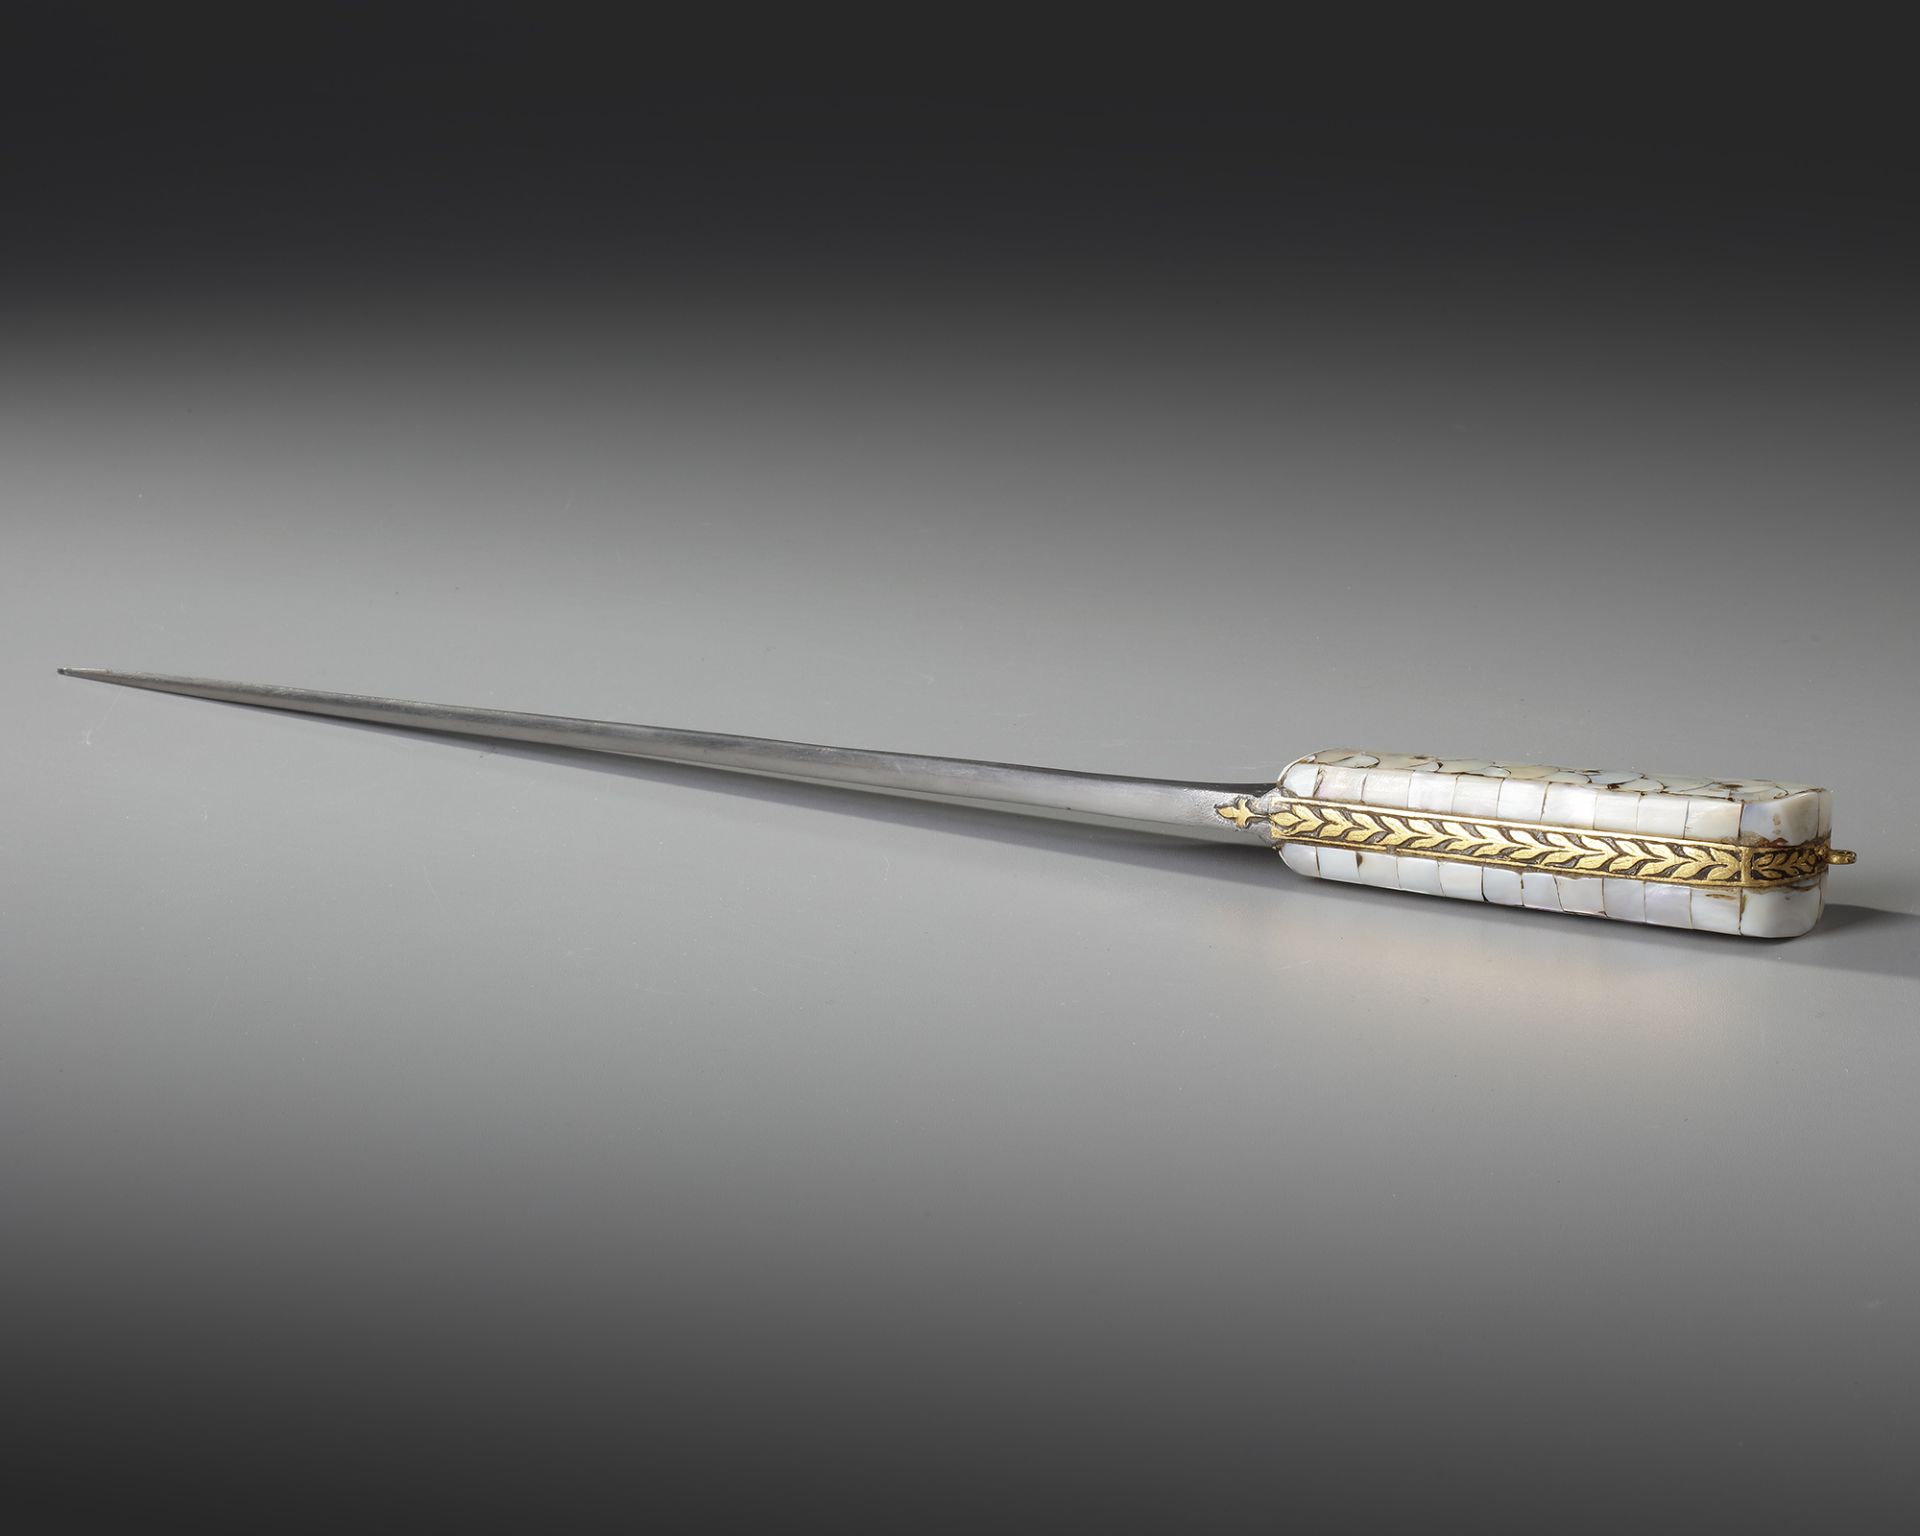 A MOTHER-OF-PEARL HILTED DAGGER (PESHKABZ), INDIA, GUJARAT, 18TH CENTURY - Image 5 of 5